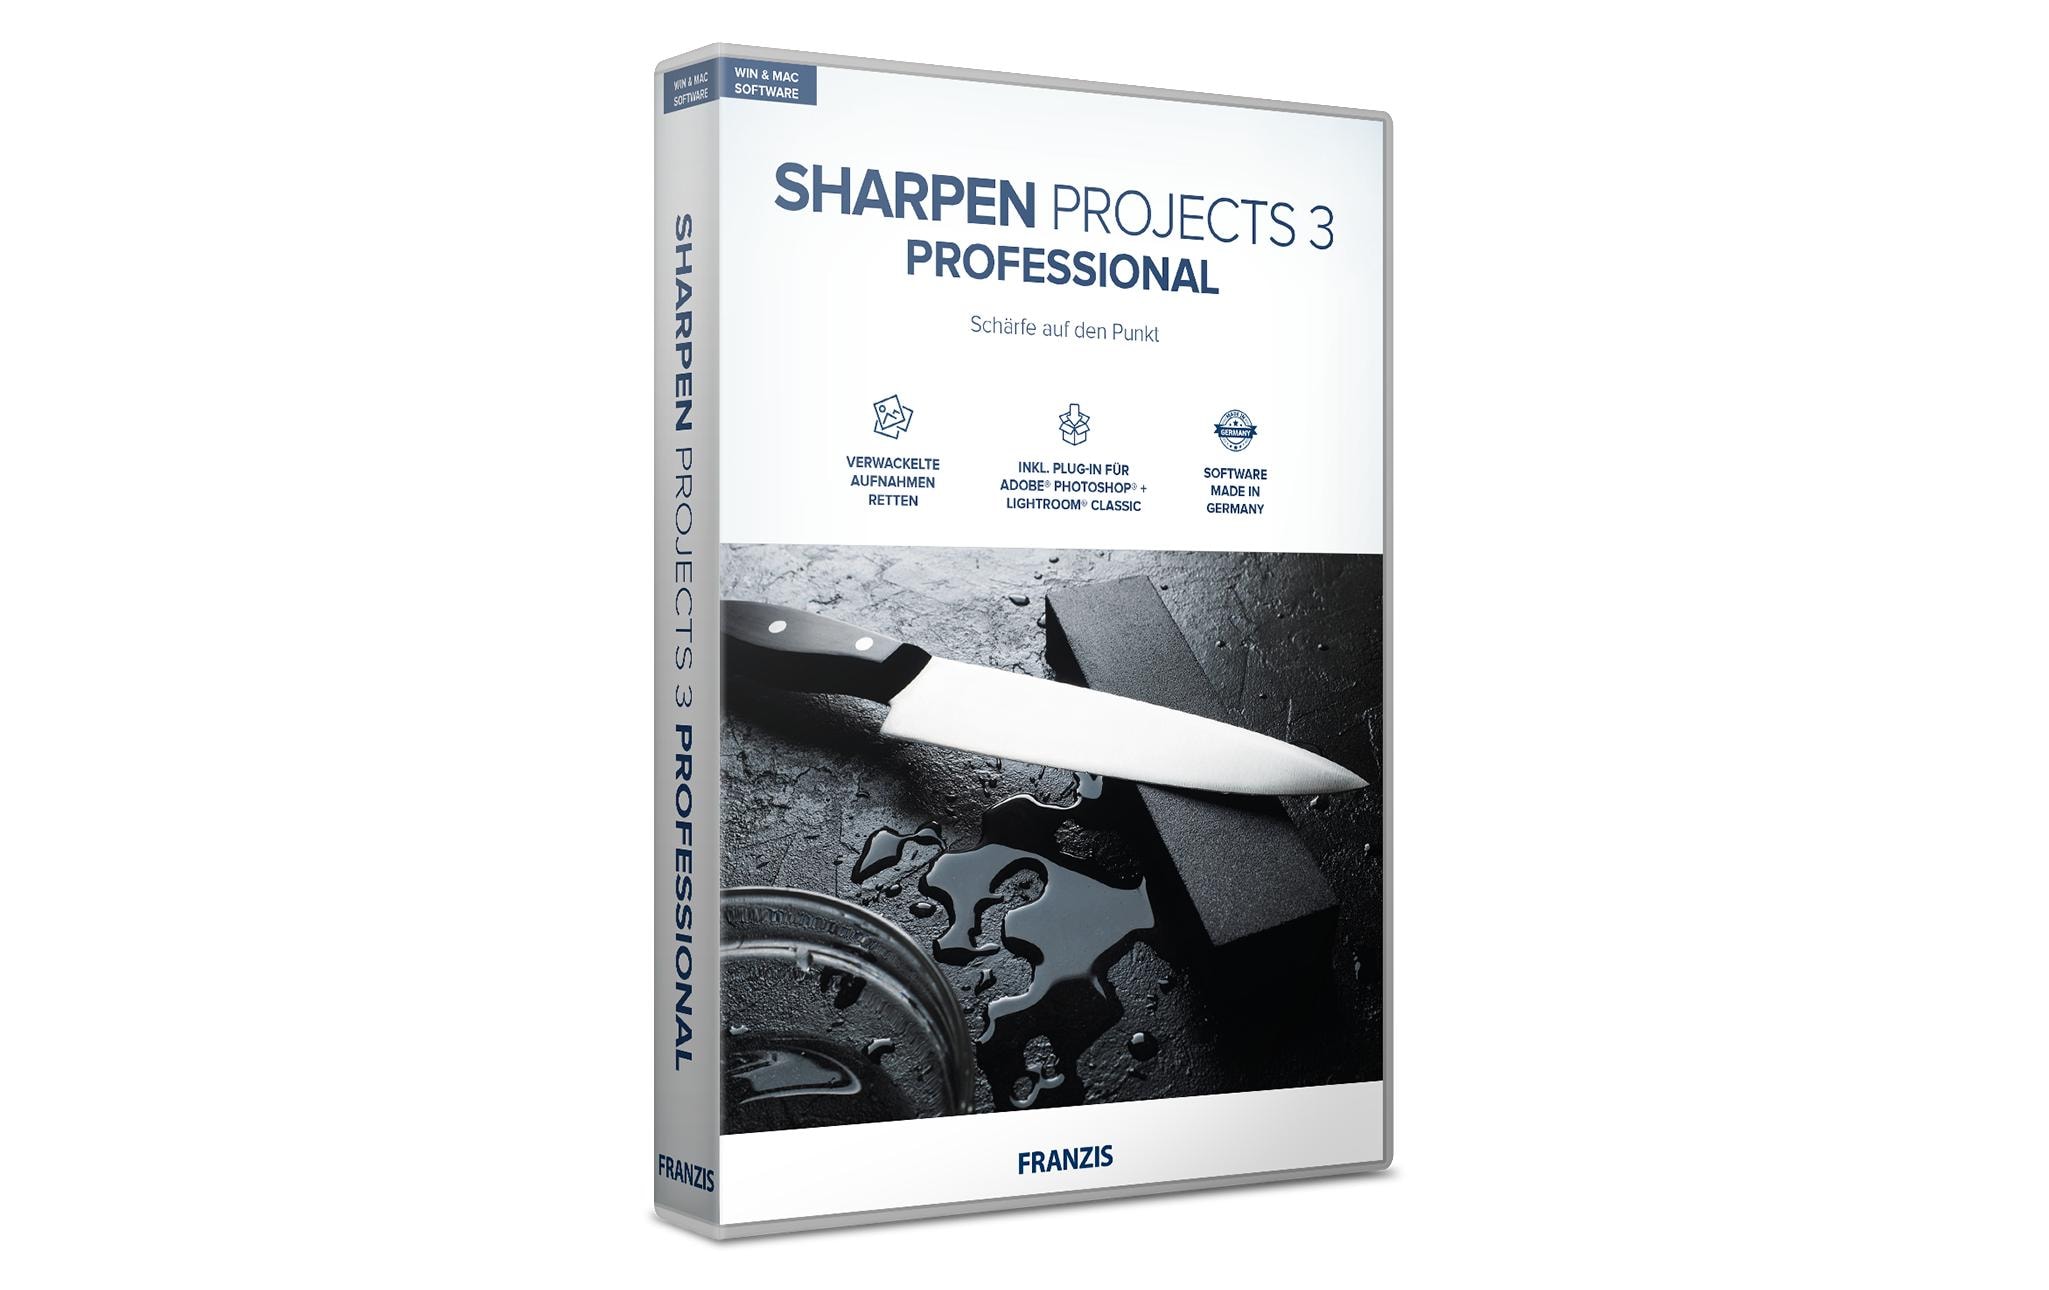 Franzis Sharpen Projects 3 professional